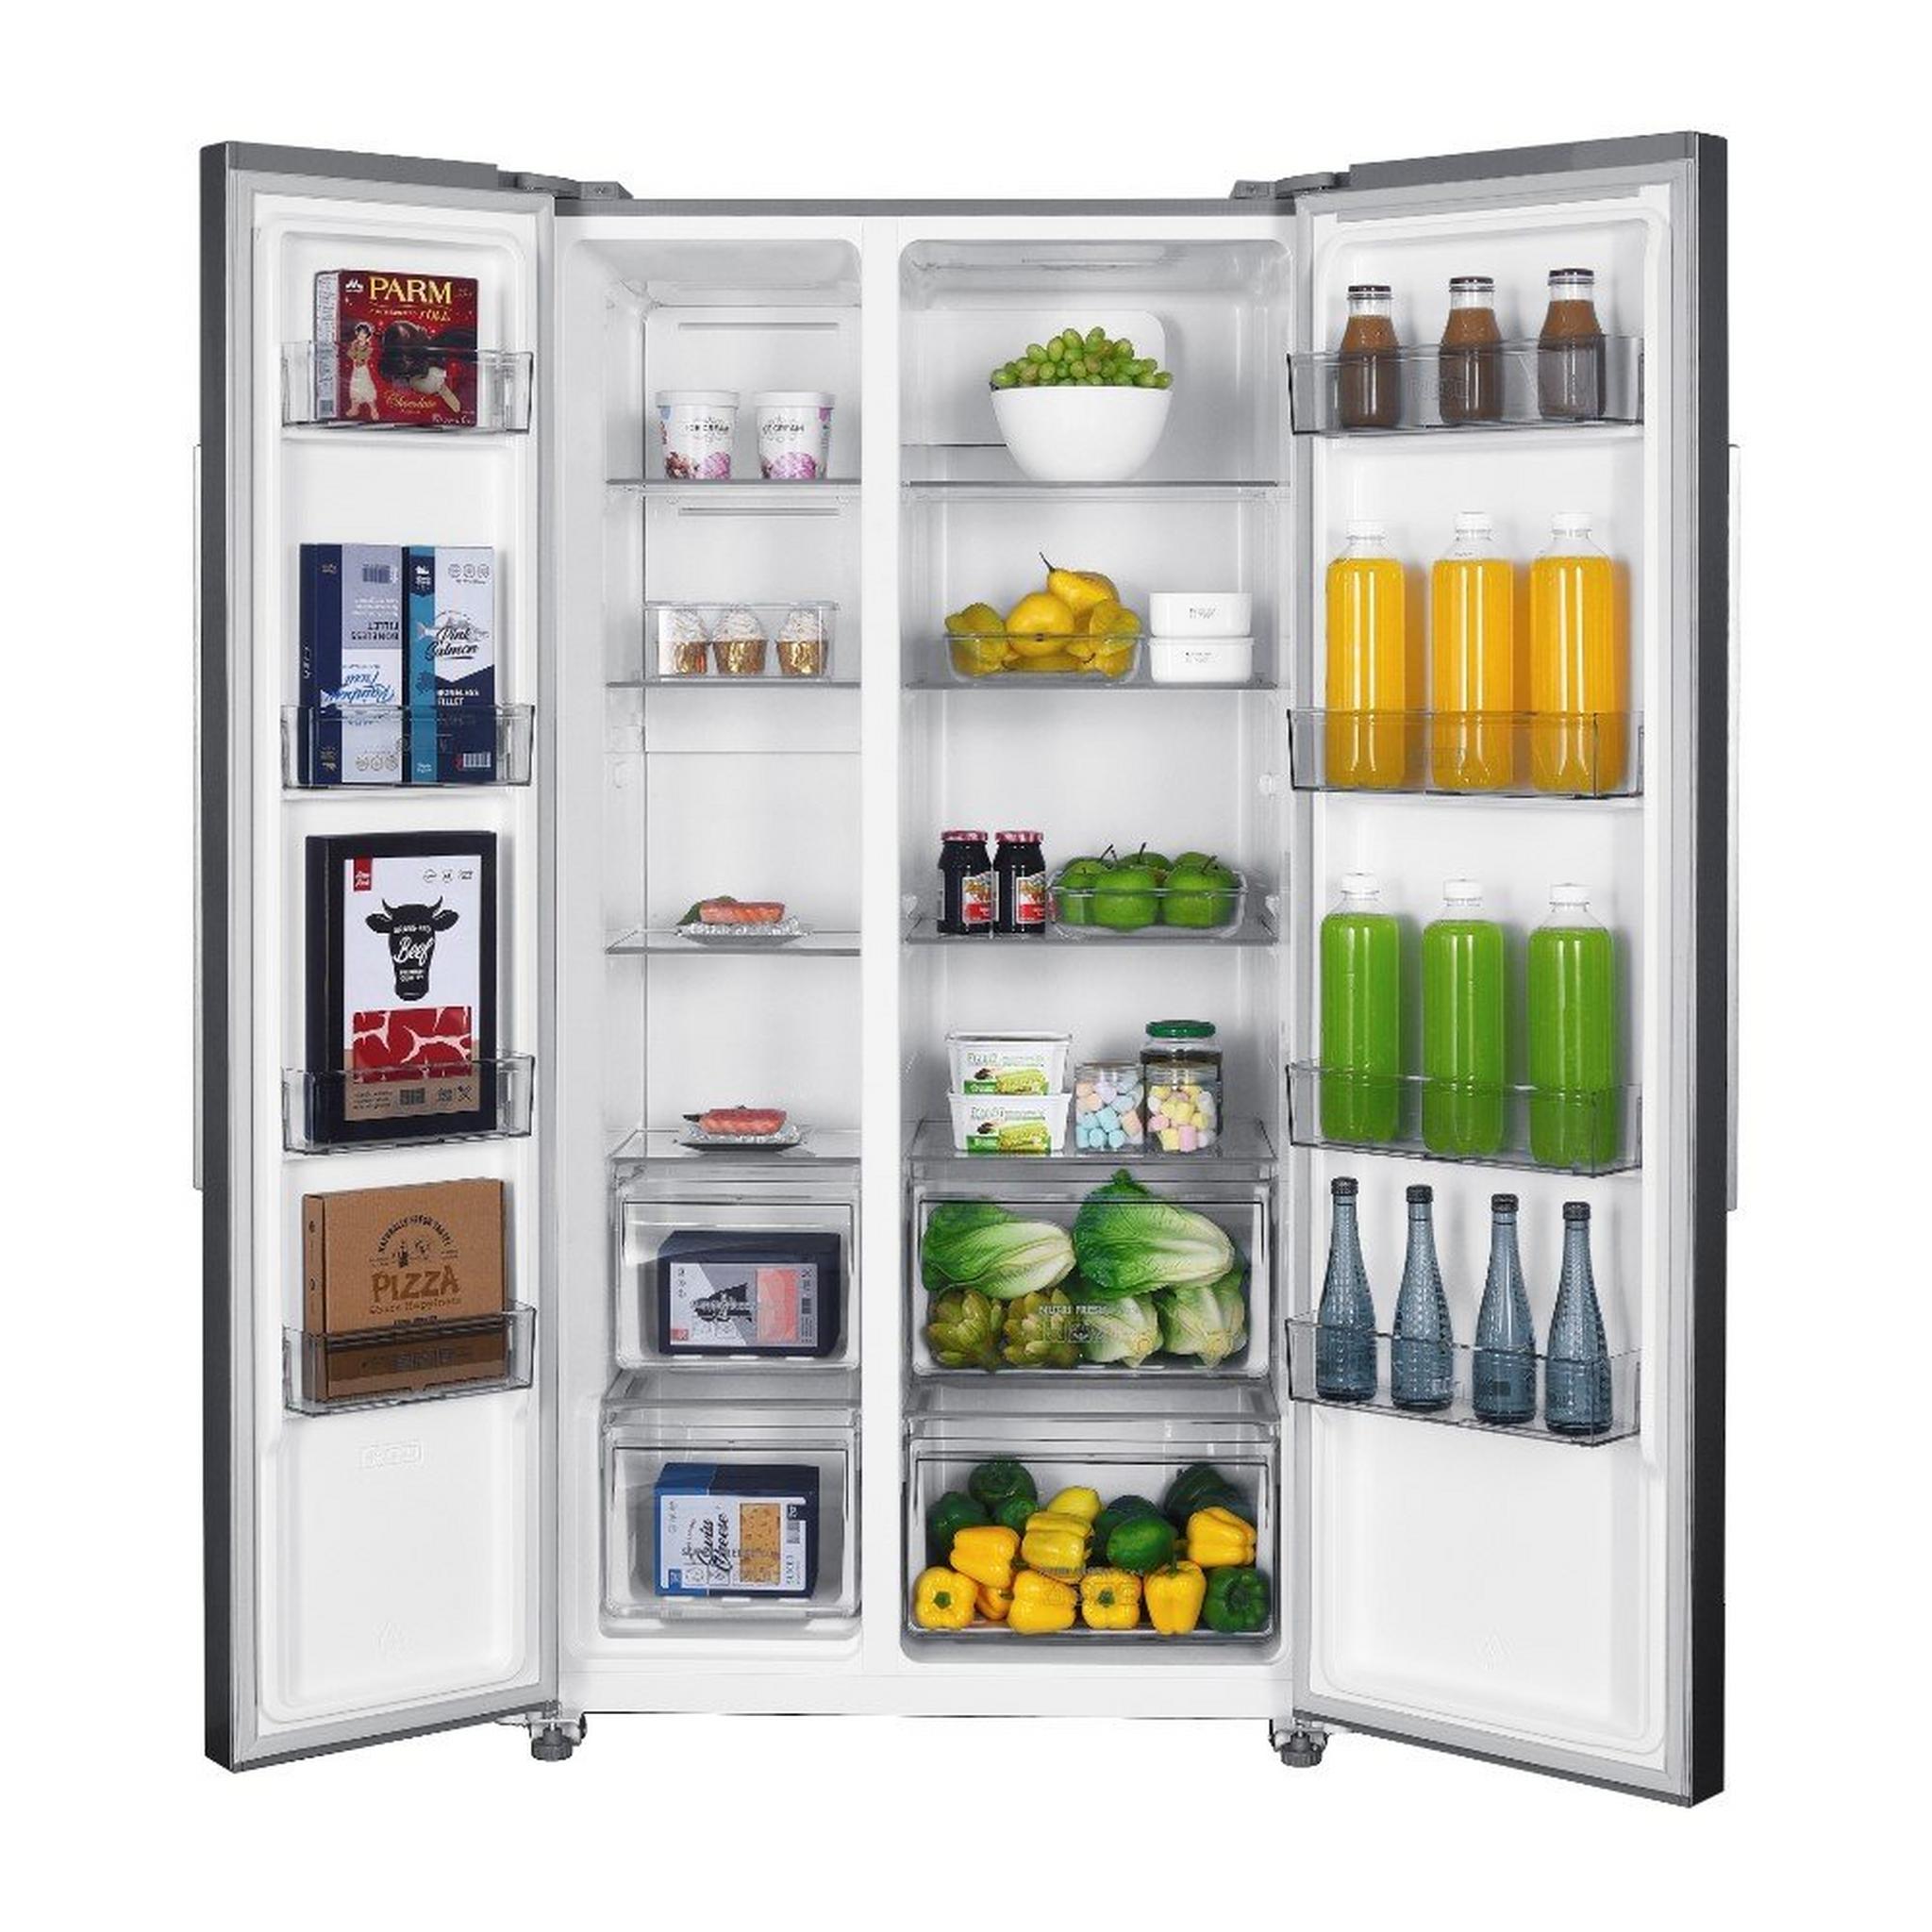 Wansa 20 CFT Side By Side Refrigerator and Freezer - Grey (WRSG-563-NFIC82)